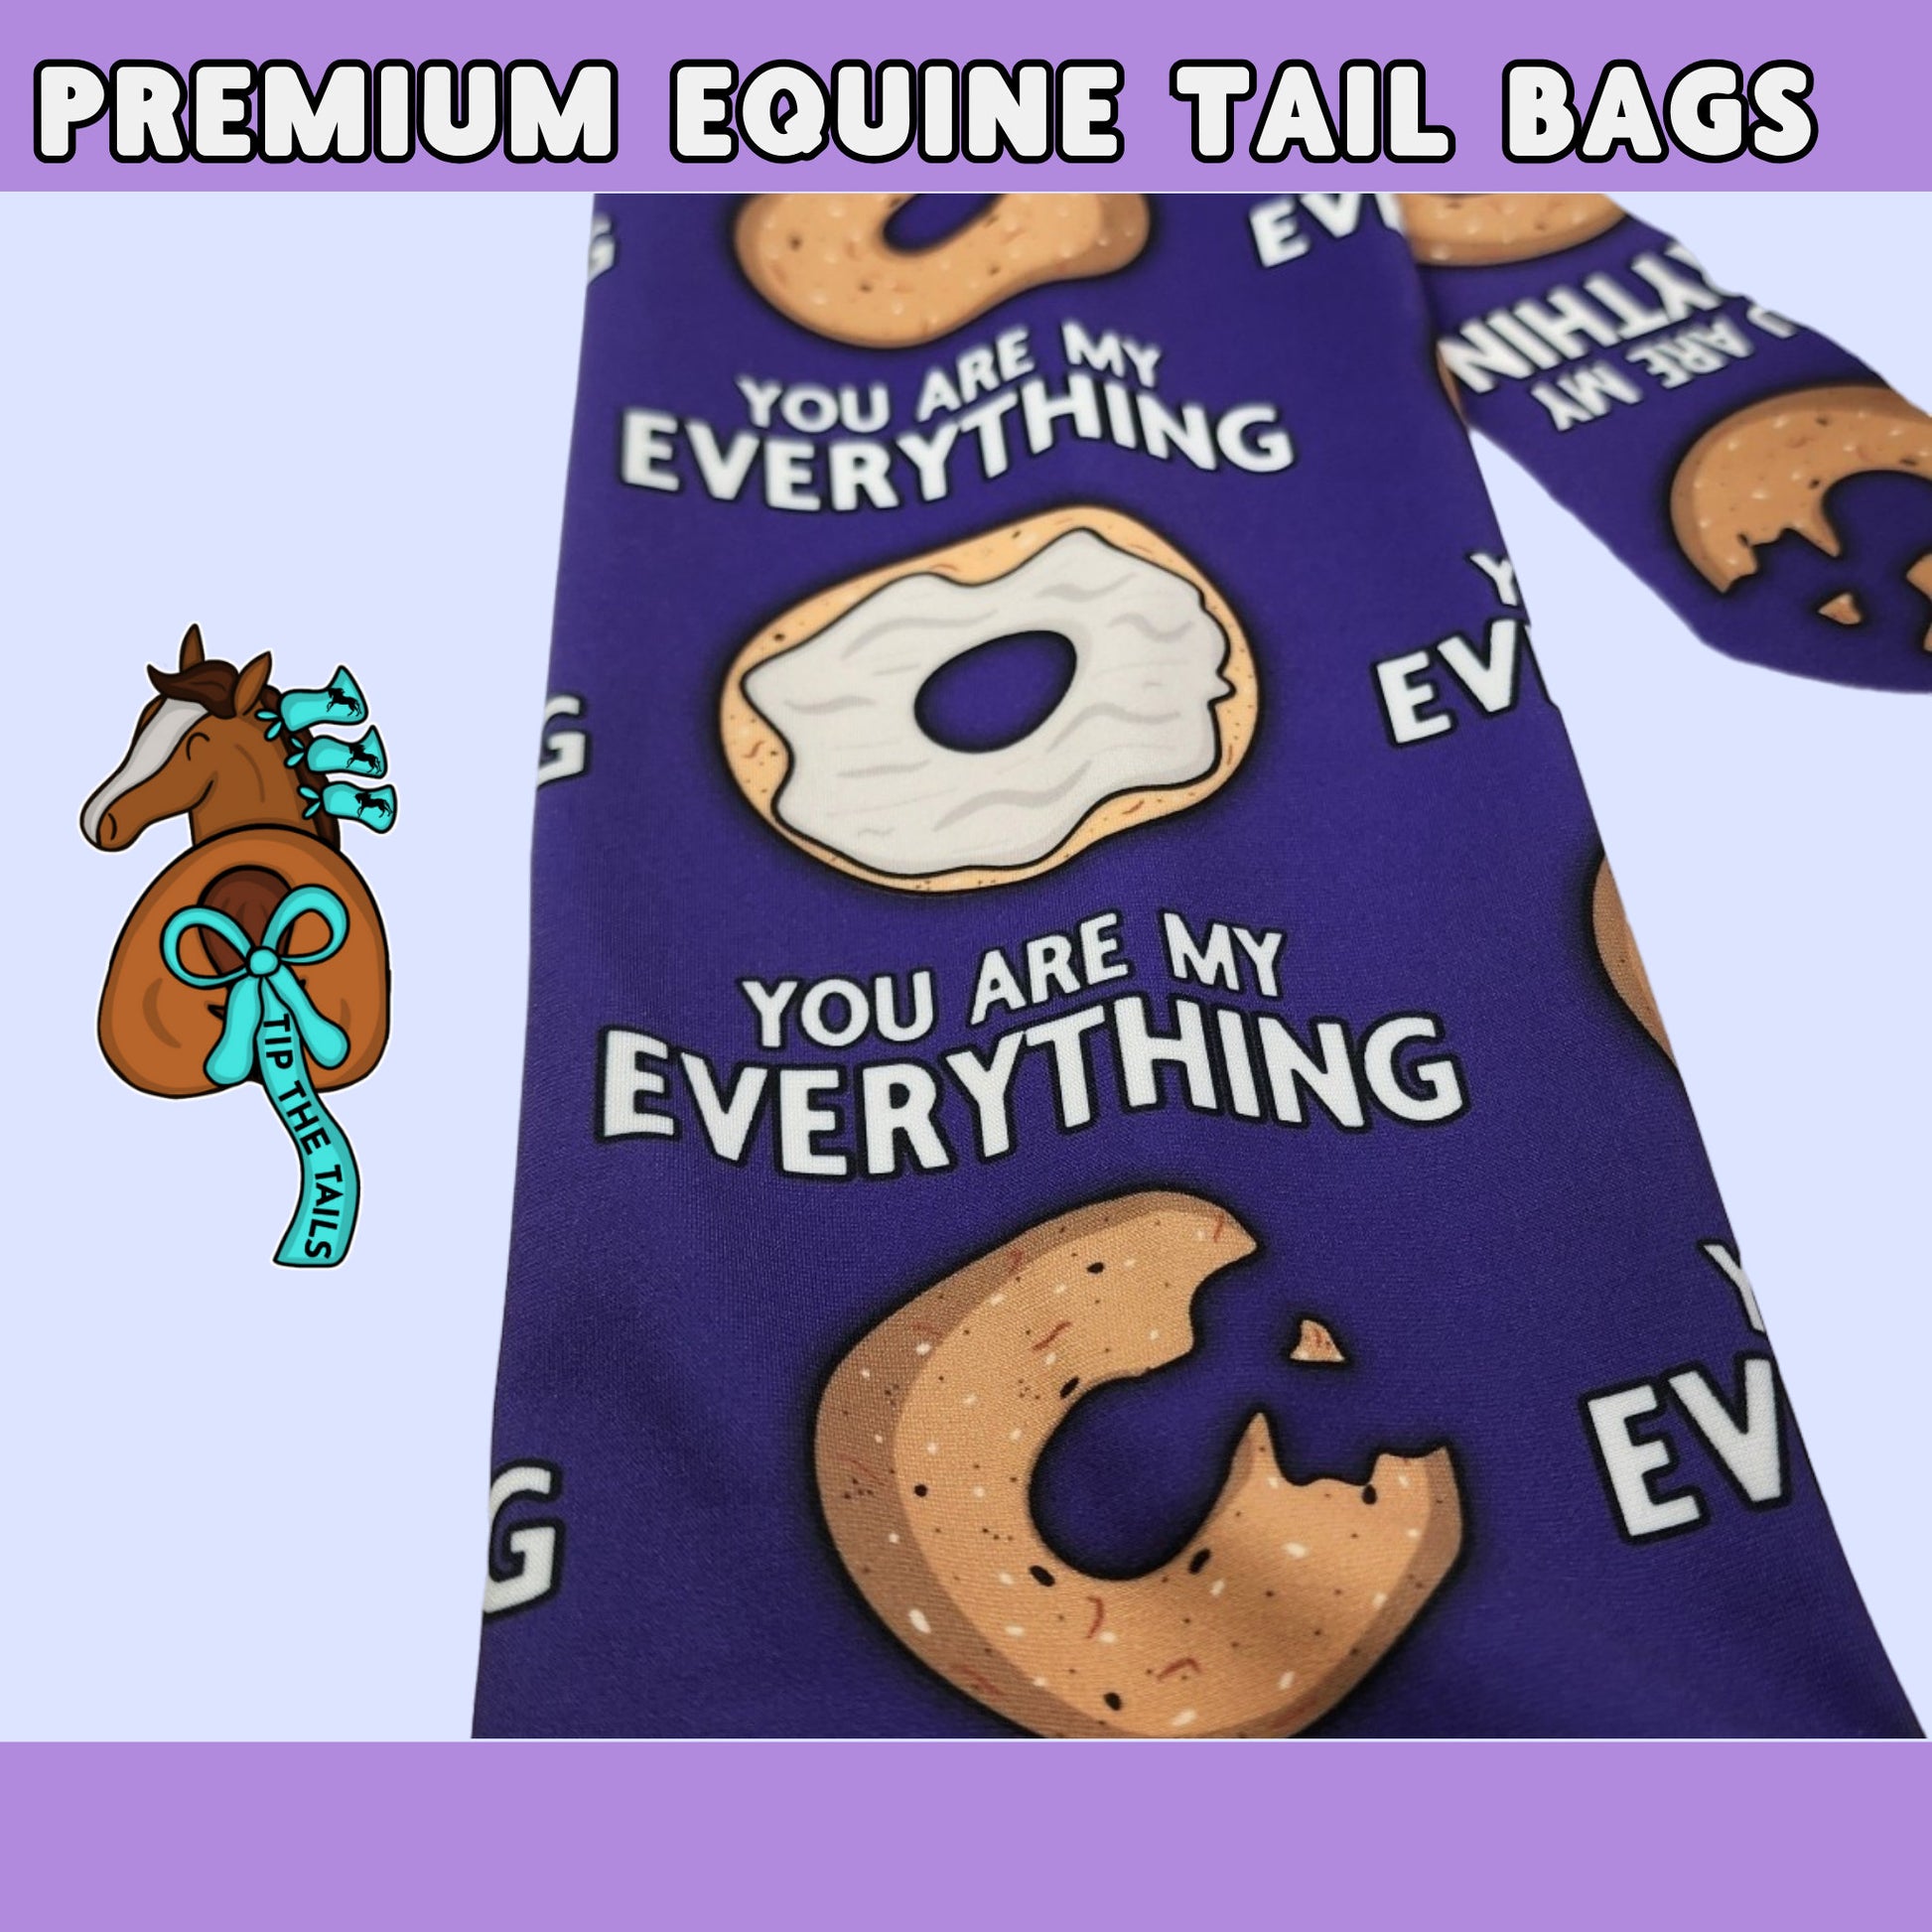 You are my Everything (Bagel) Equine-Tip The Tails